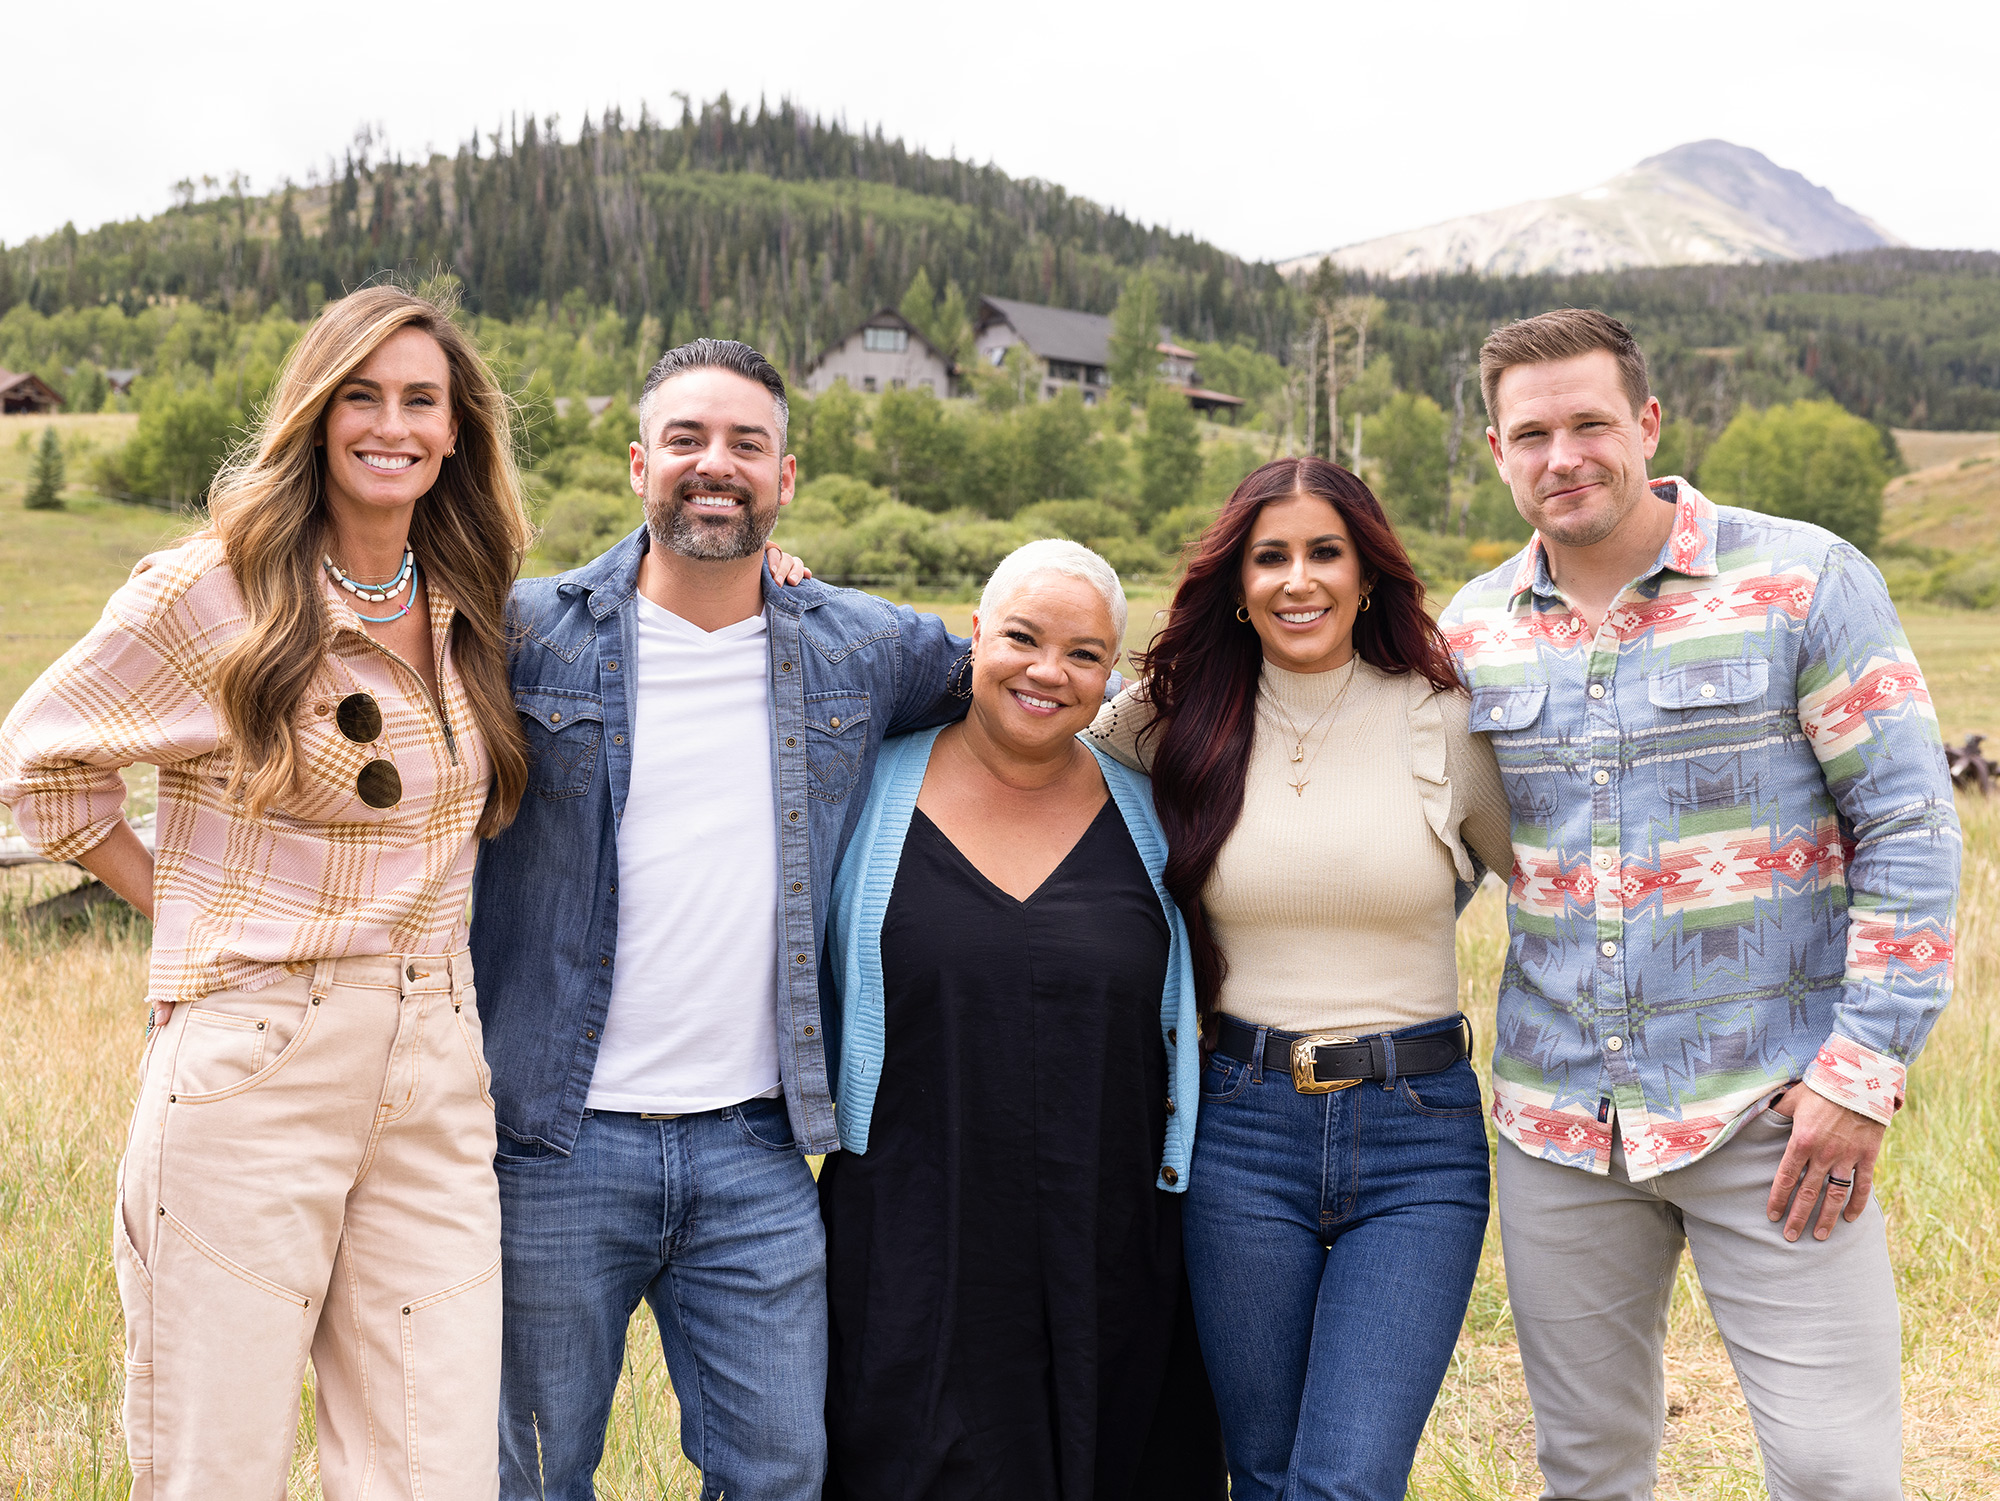 Here's what it's like filming for HGTV's Battle on the Mountain.